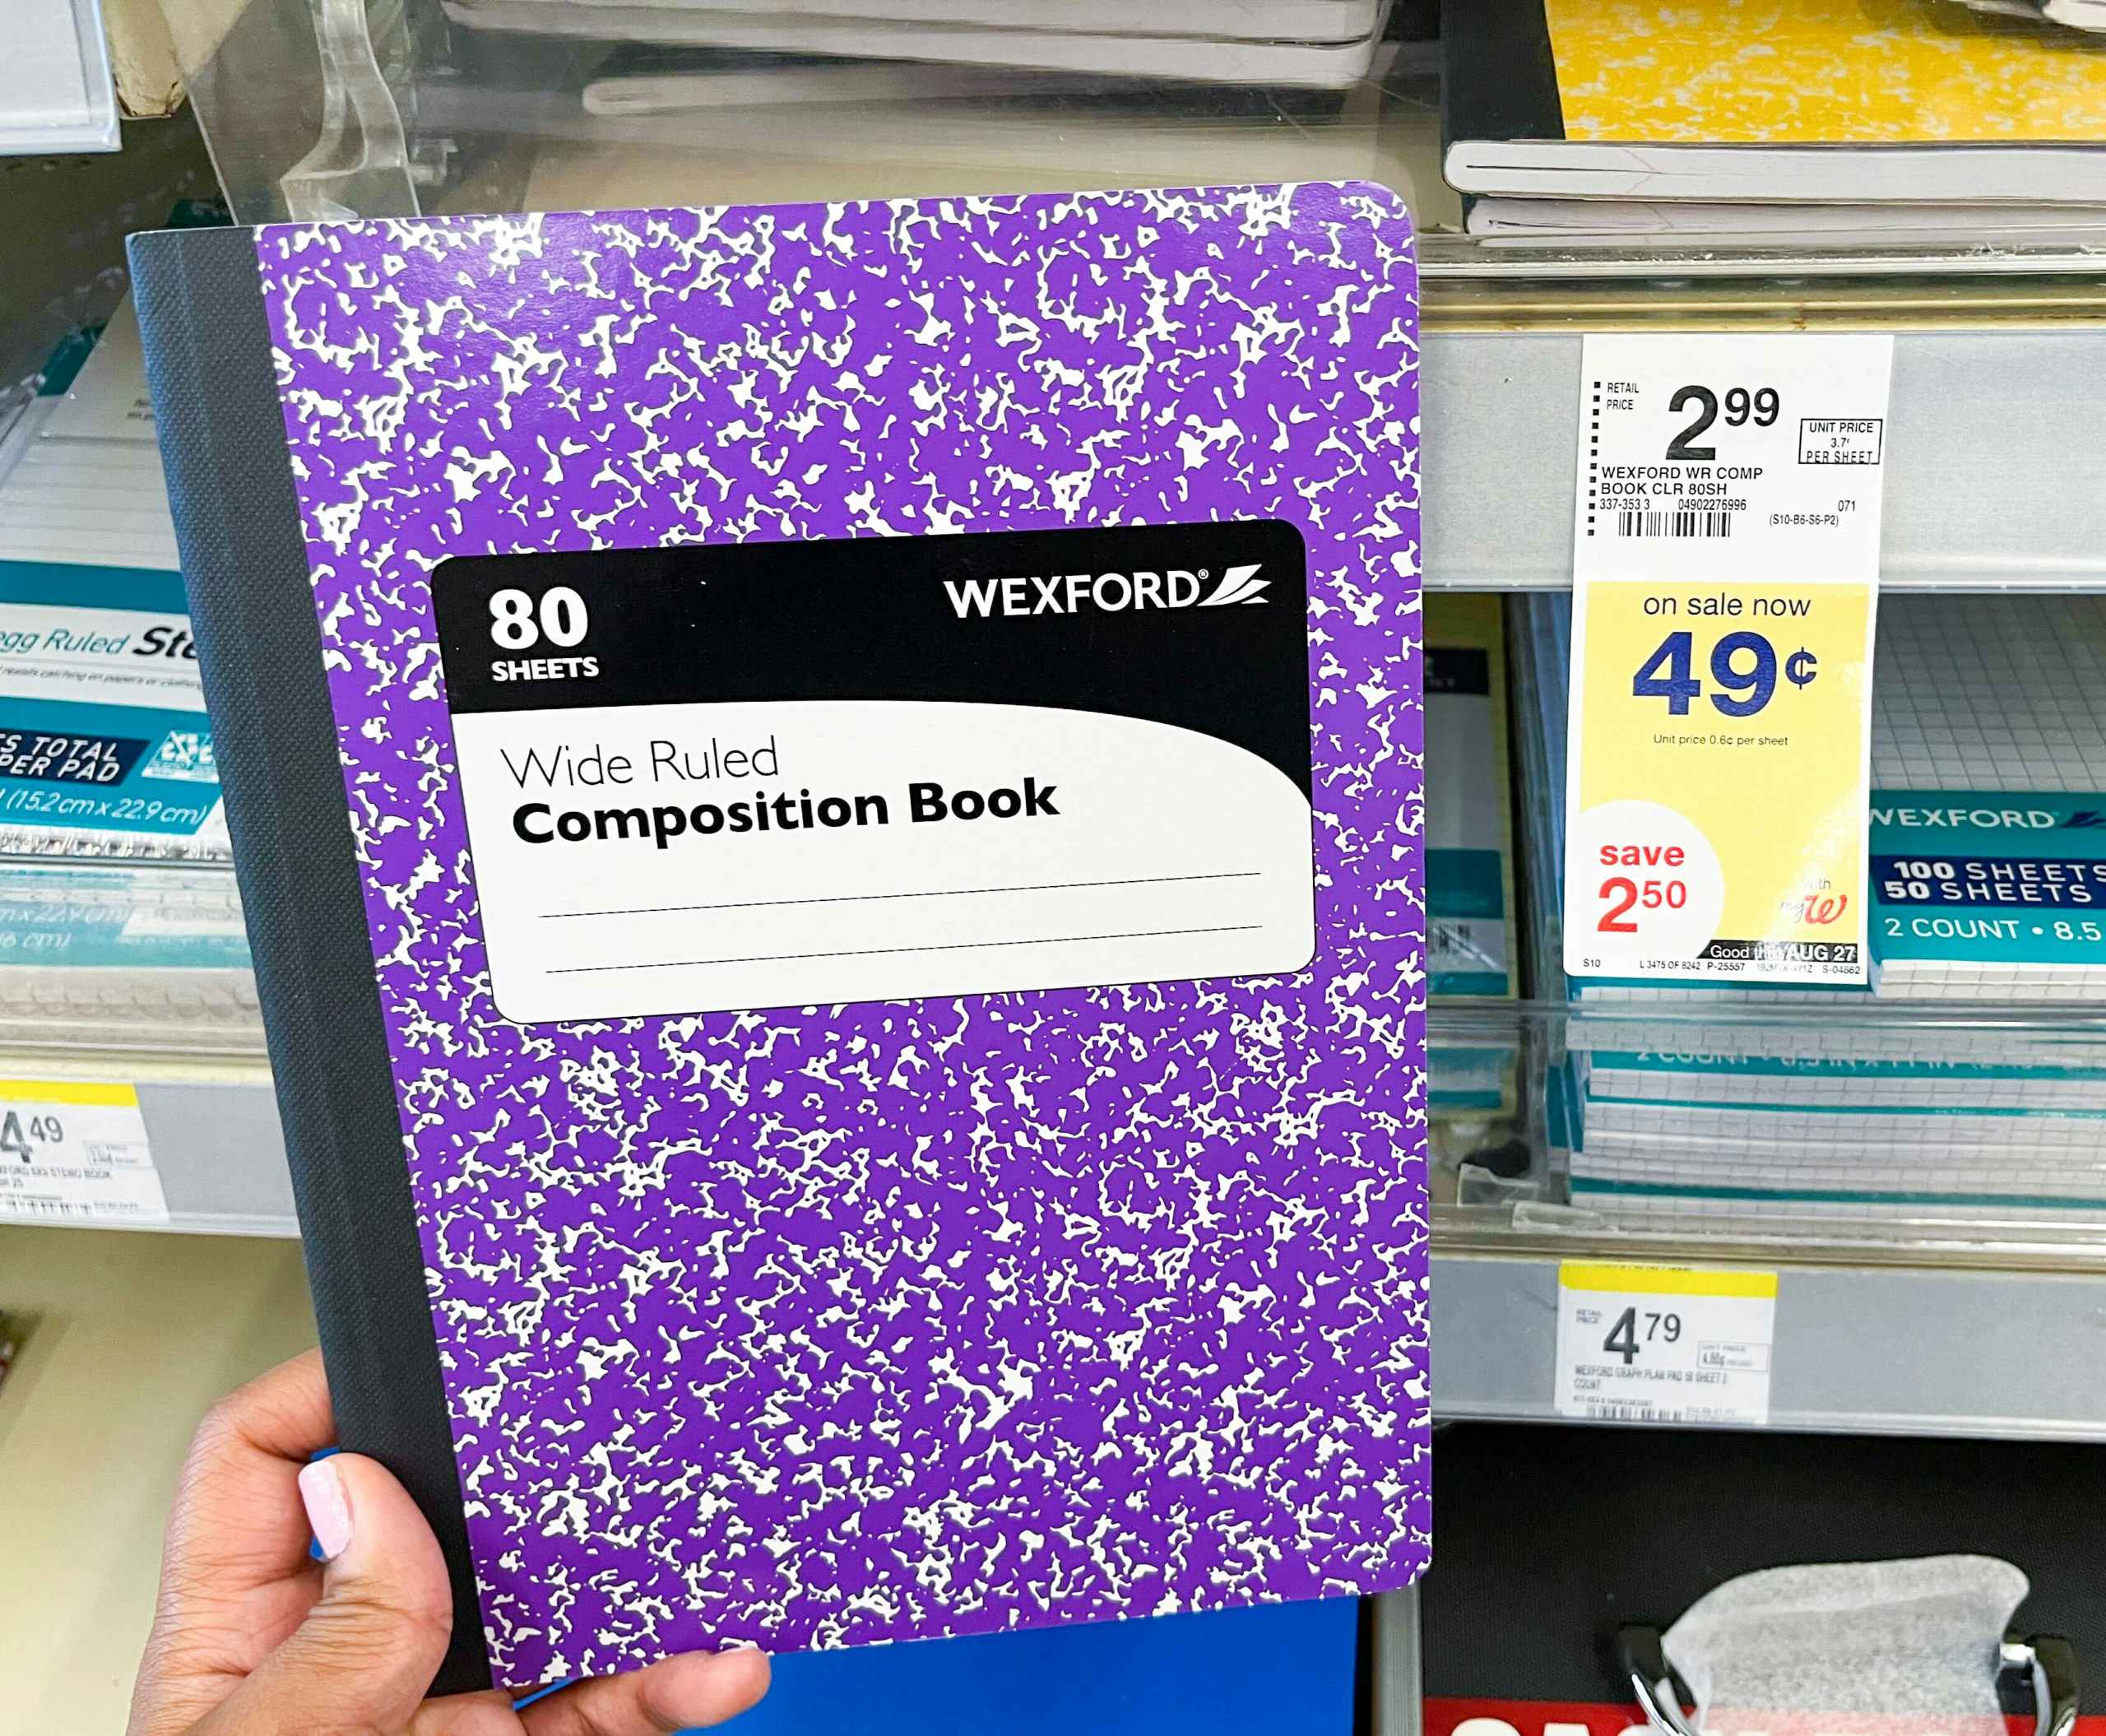 Hand holding Wexford Wide Ruled Composition Book next to sales tag